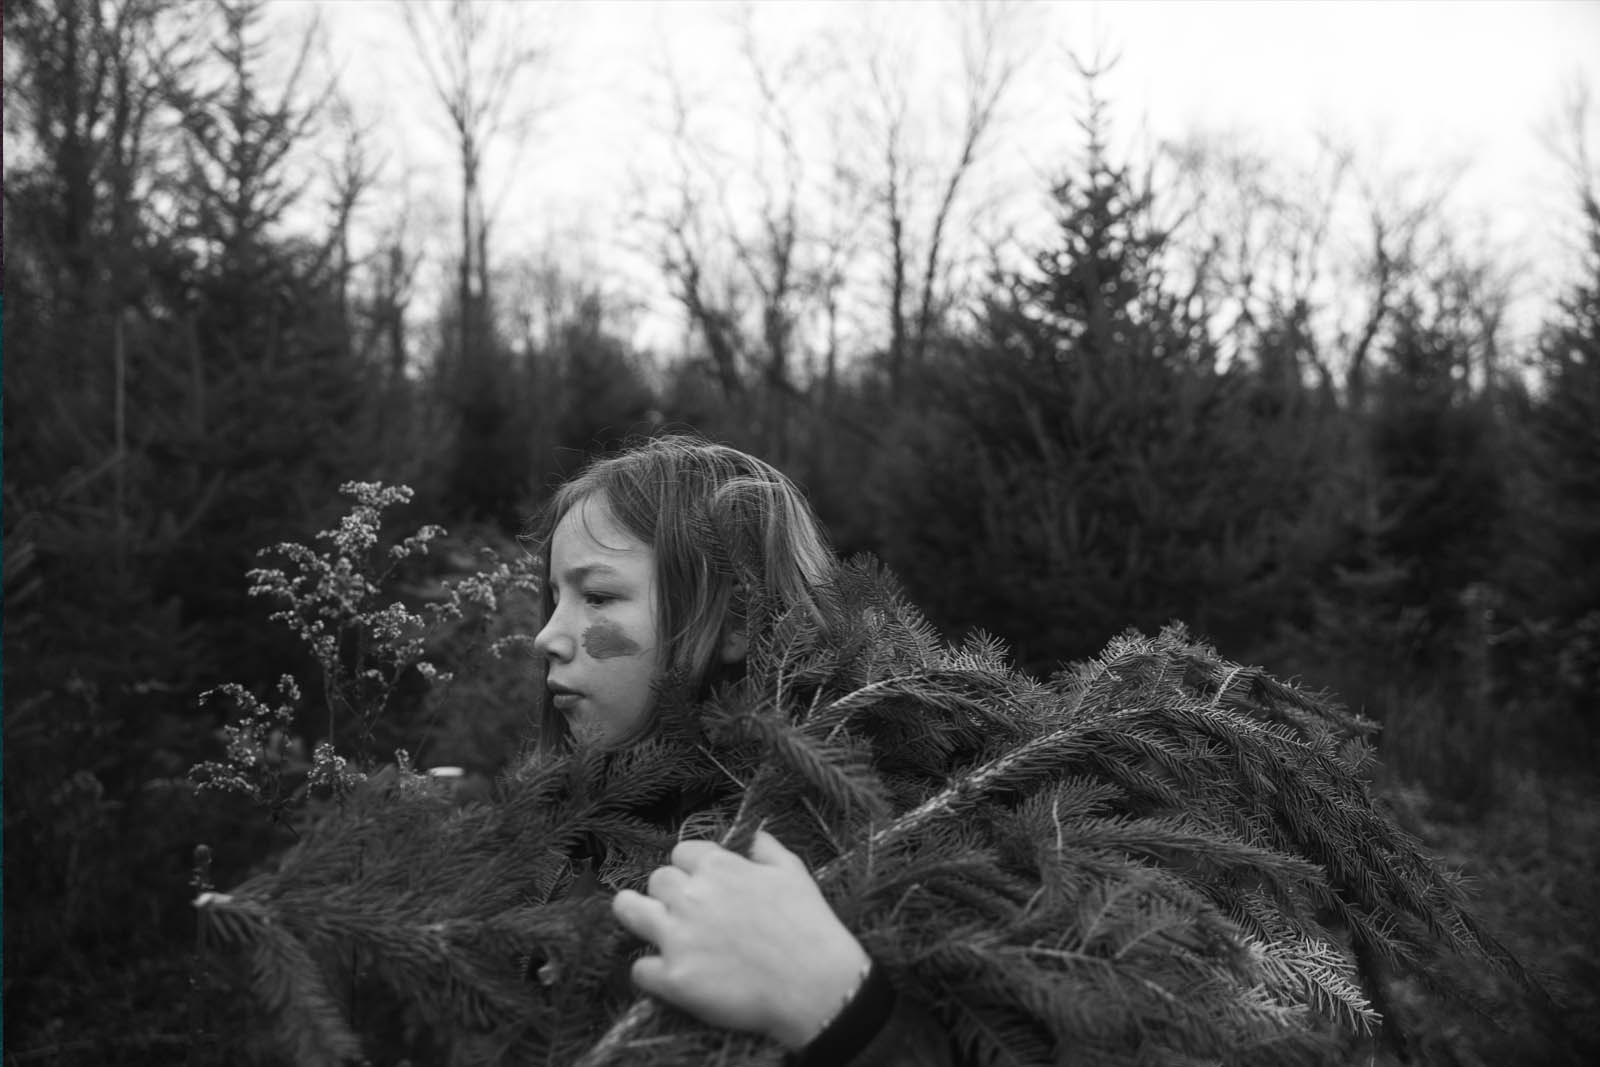 A young girl carrying tree branches in a black and white photo